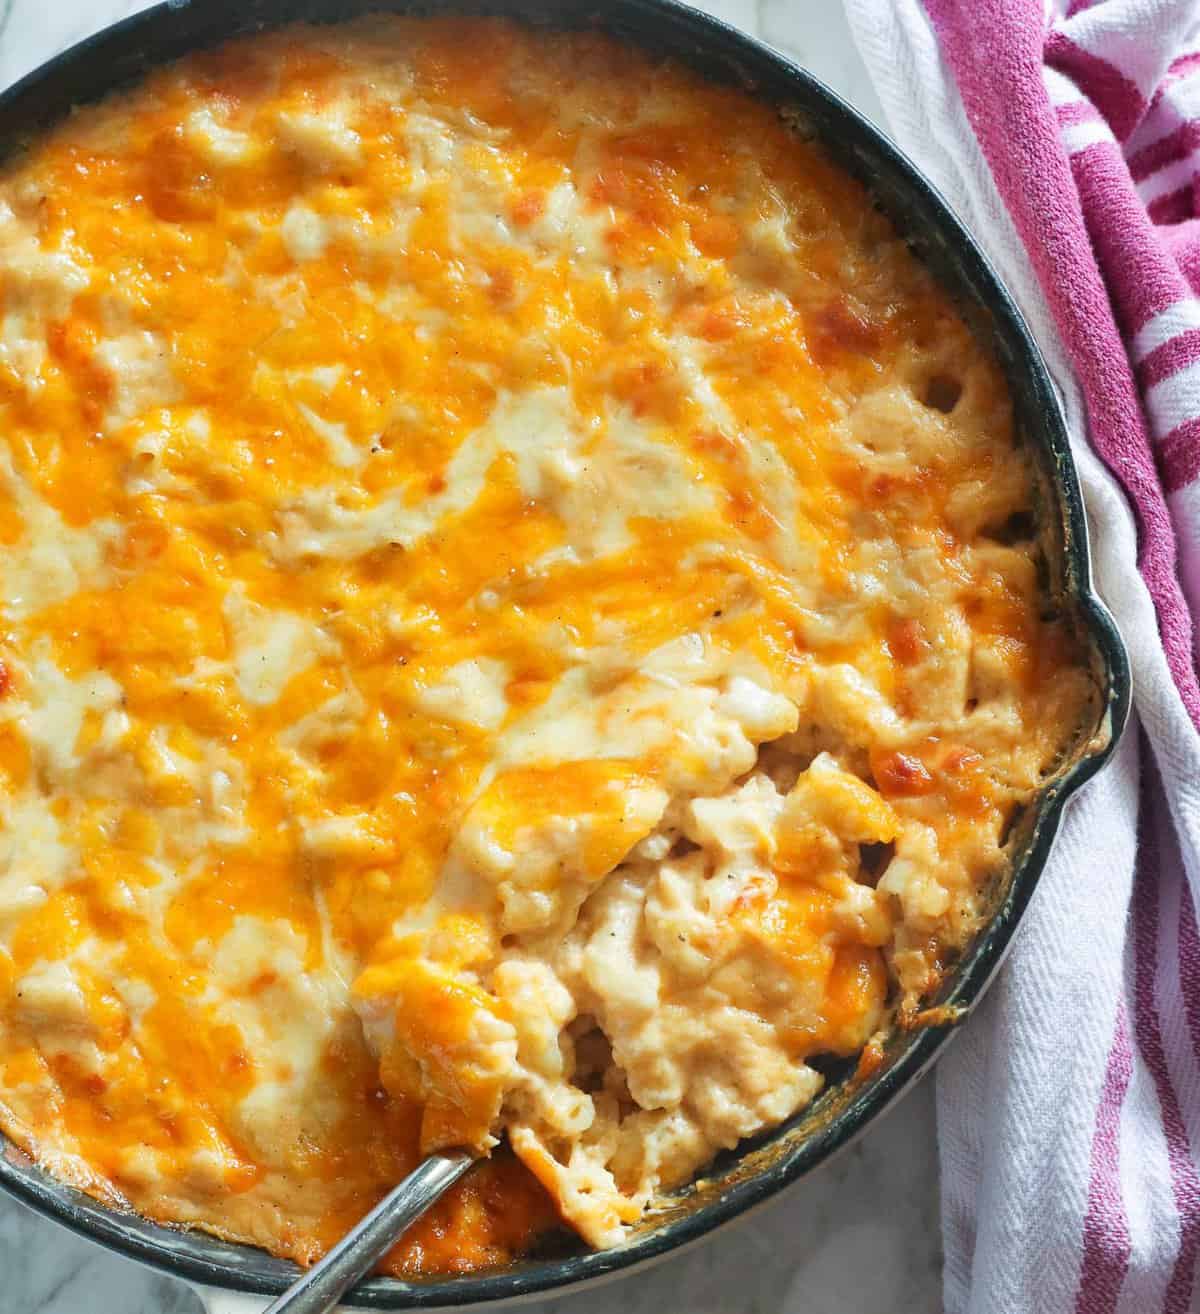 Smoked Mac and Cheese gives an exciting taste